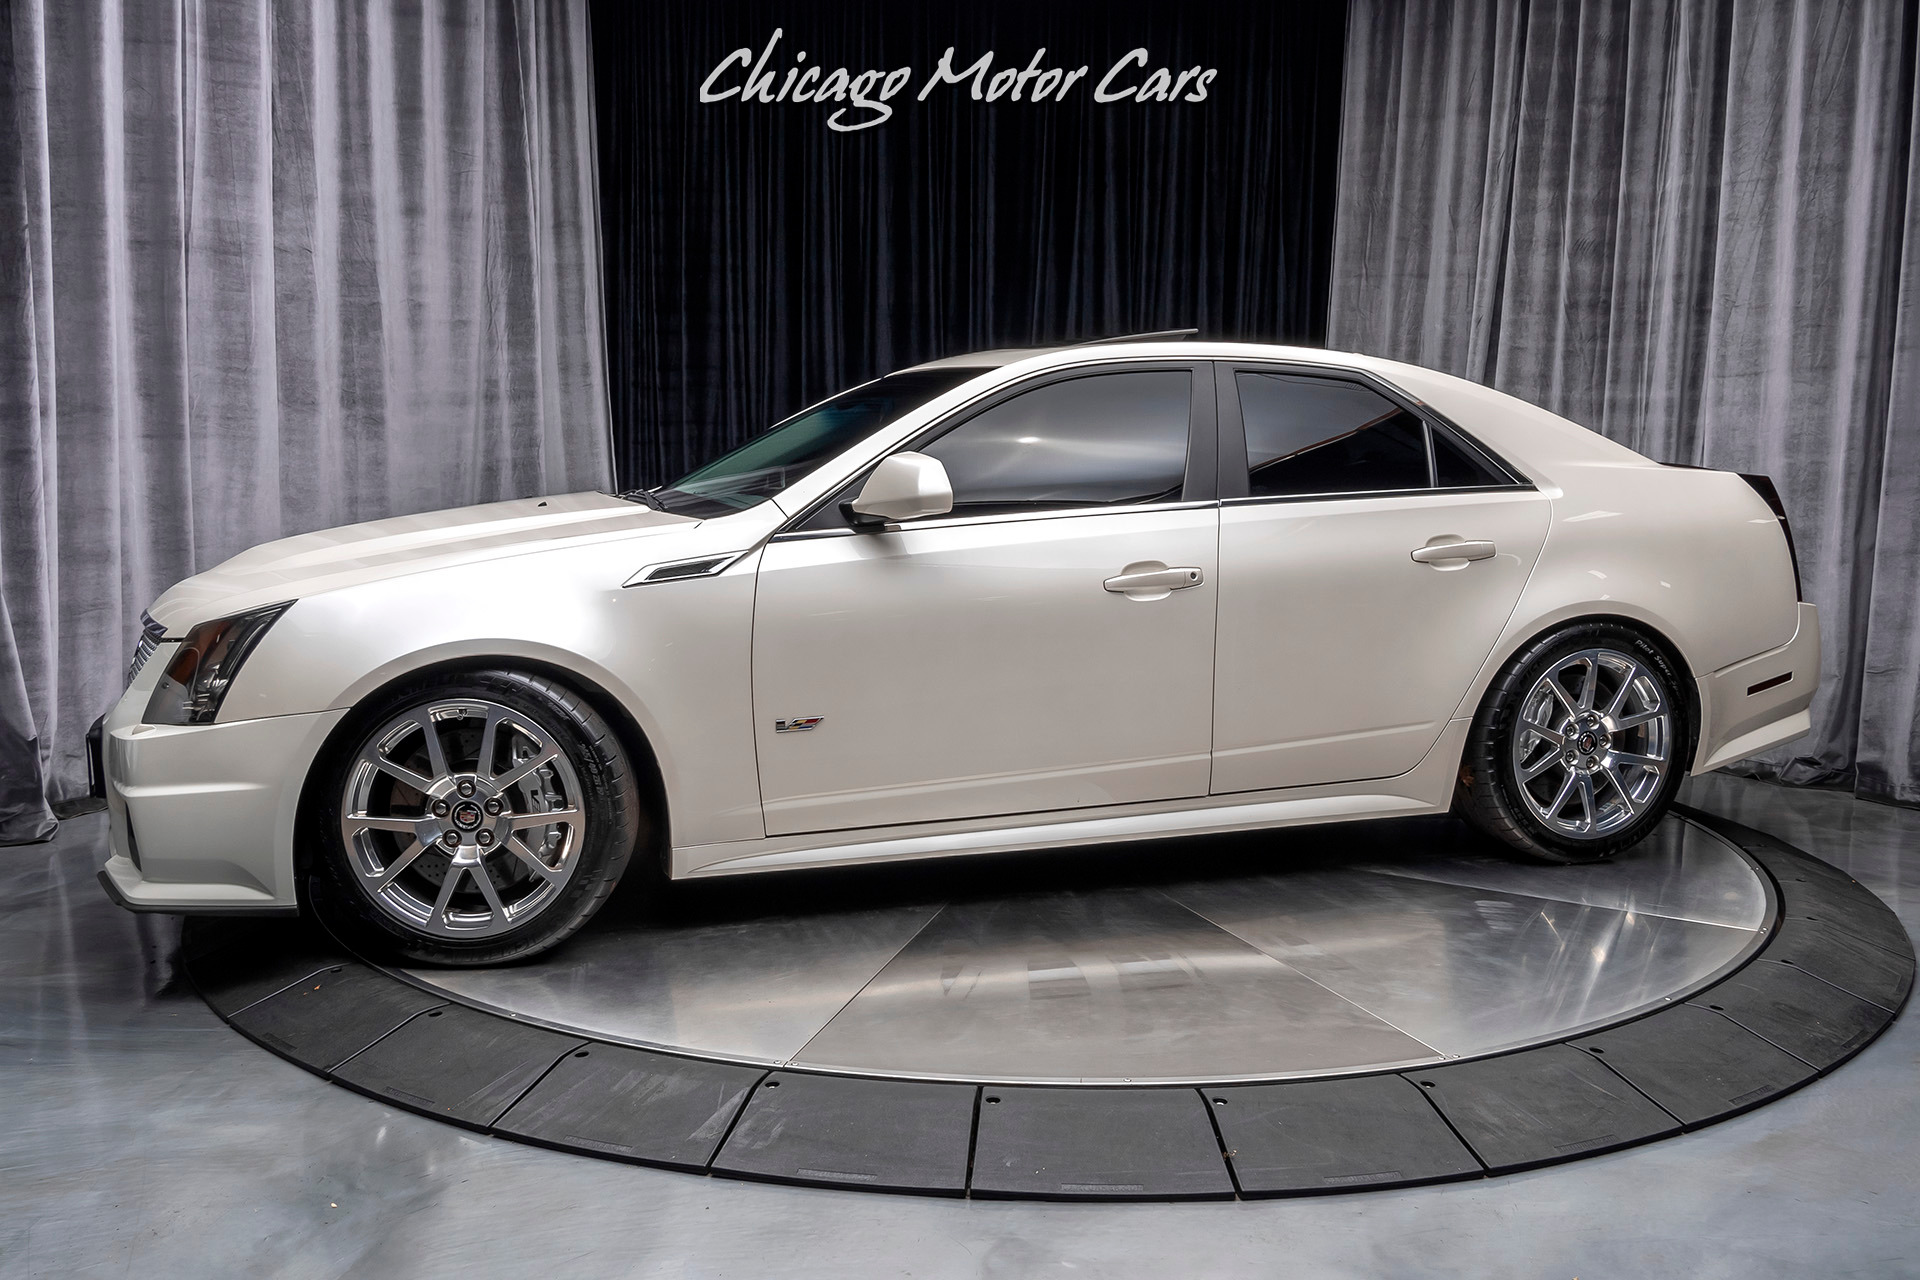 Used 2013 Cadillac CTS-V Sedan LOADED WITH THOUSANDS IN UPGRADES! 900+  HORSEPOWER! For Sale (Special Pricing) | Chicago Motor Cars Stock #17283